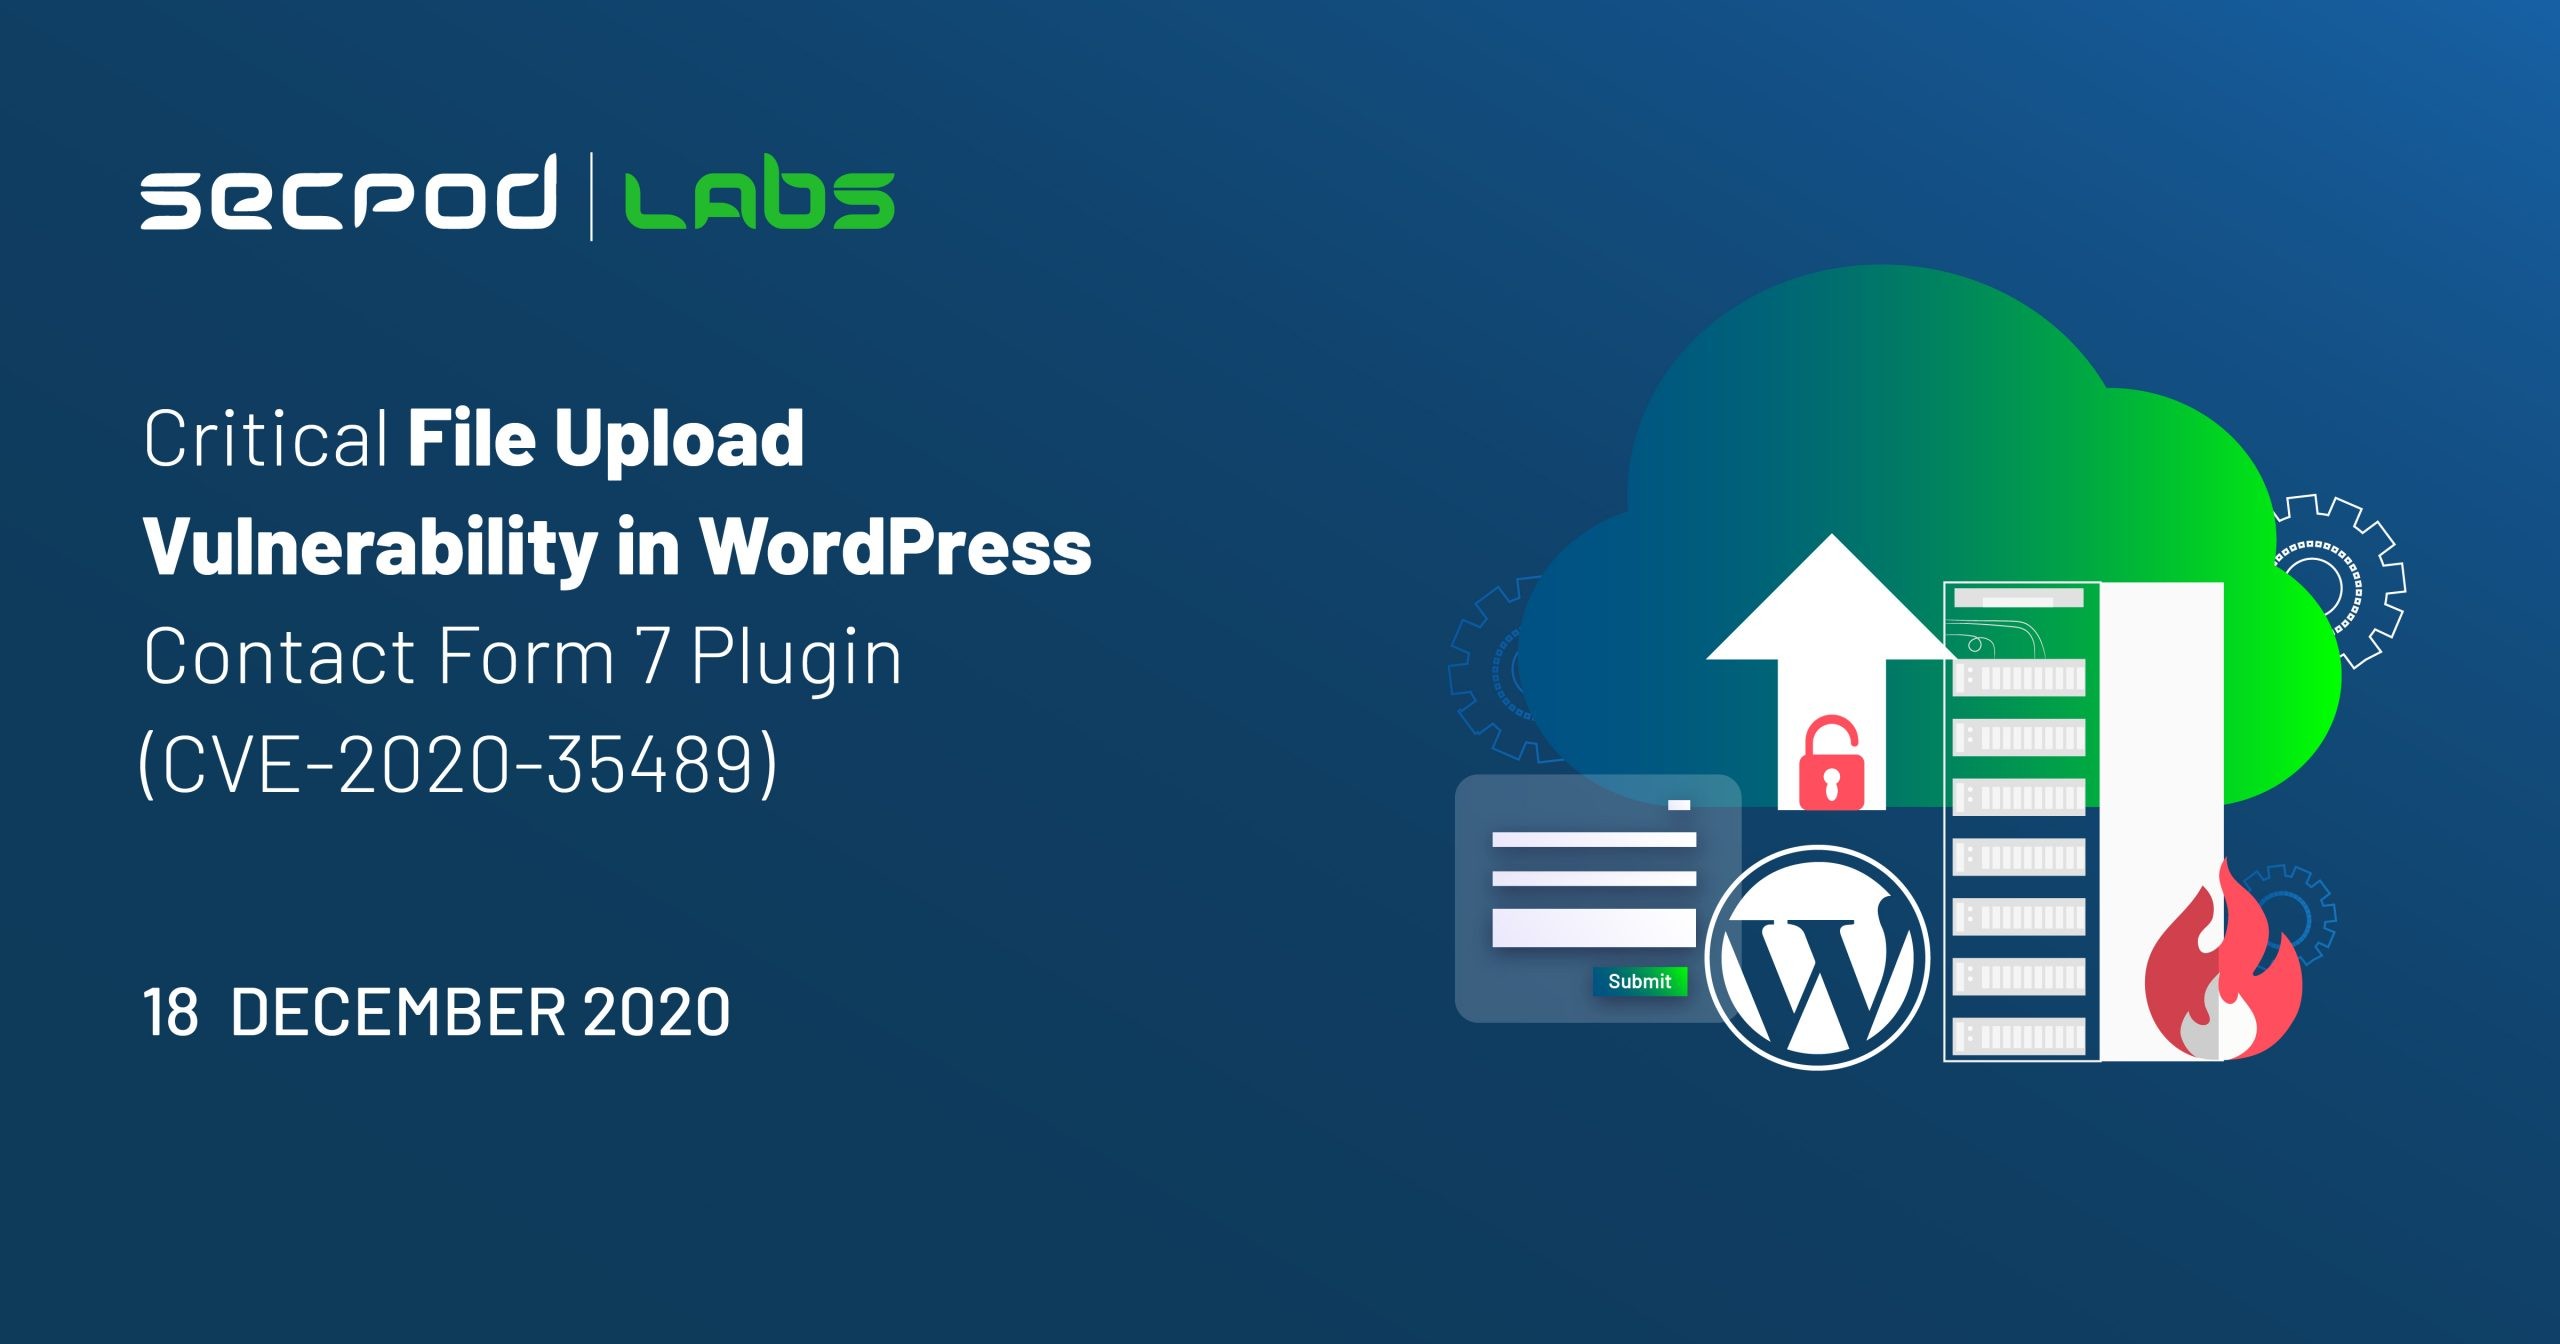 You are currently viewing WordPress Plugin Contact Form 7 Critical File Upload Vulnerability (CVE-2020-35489)